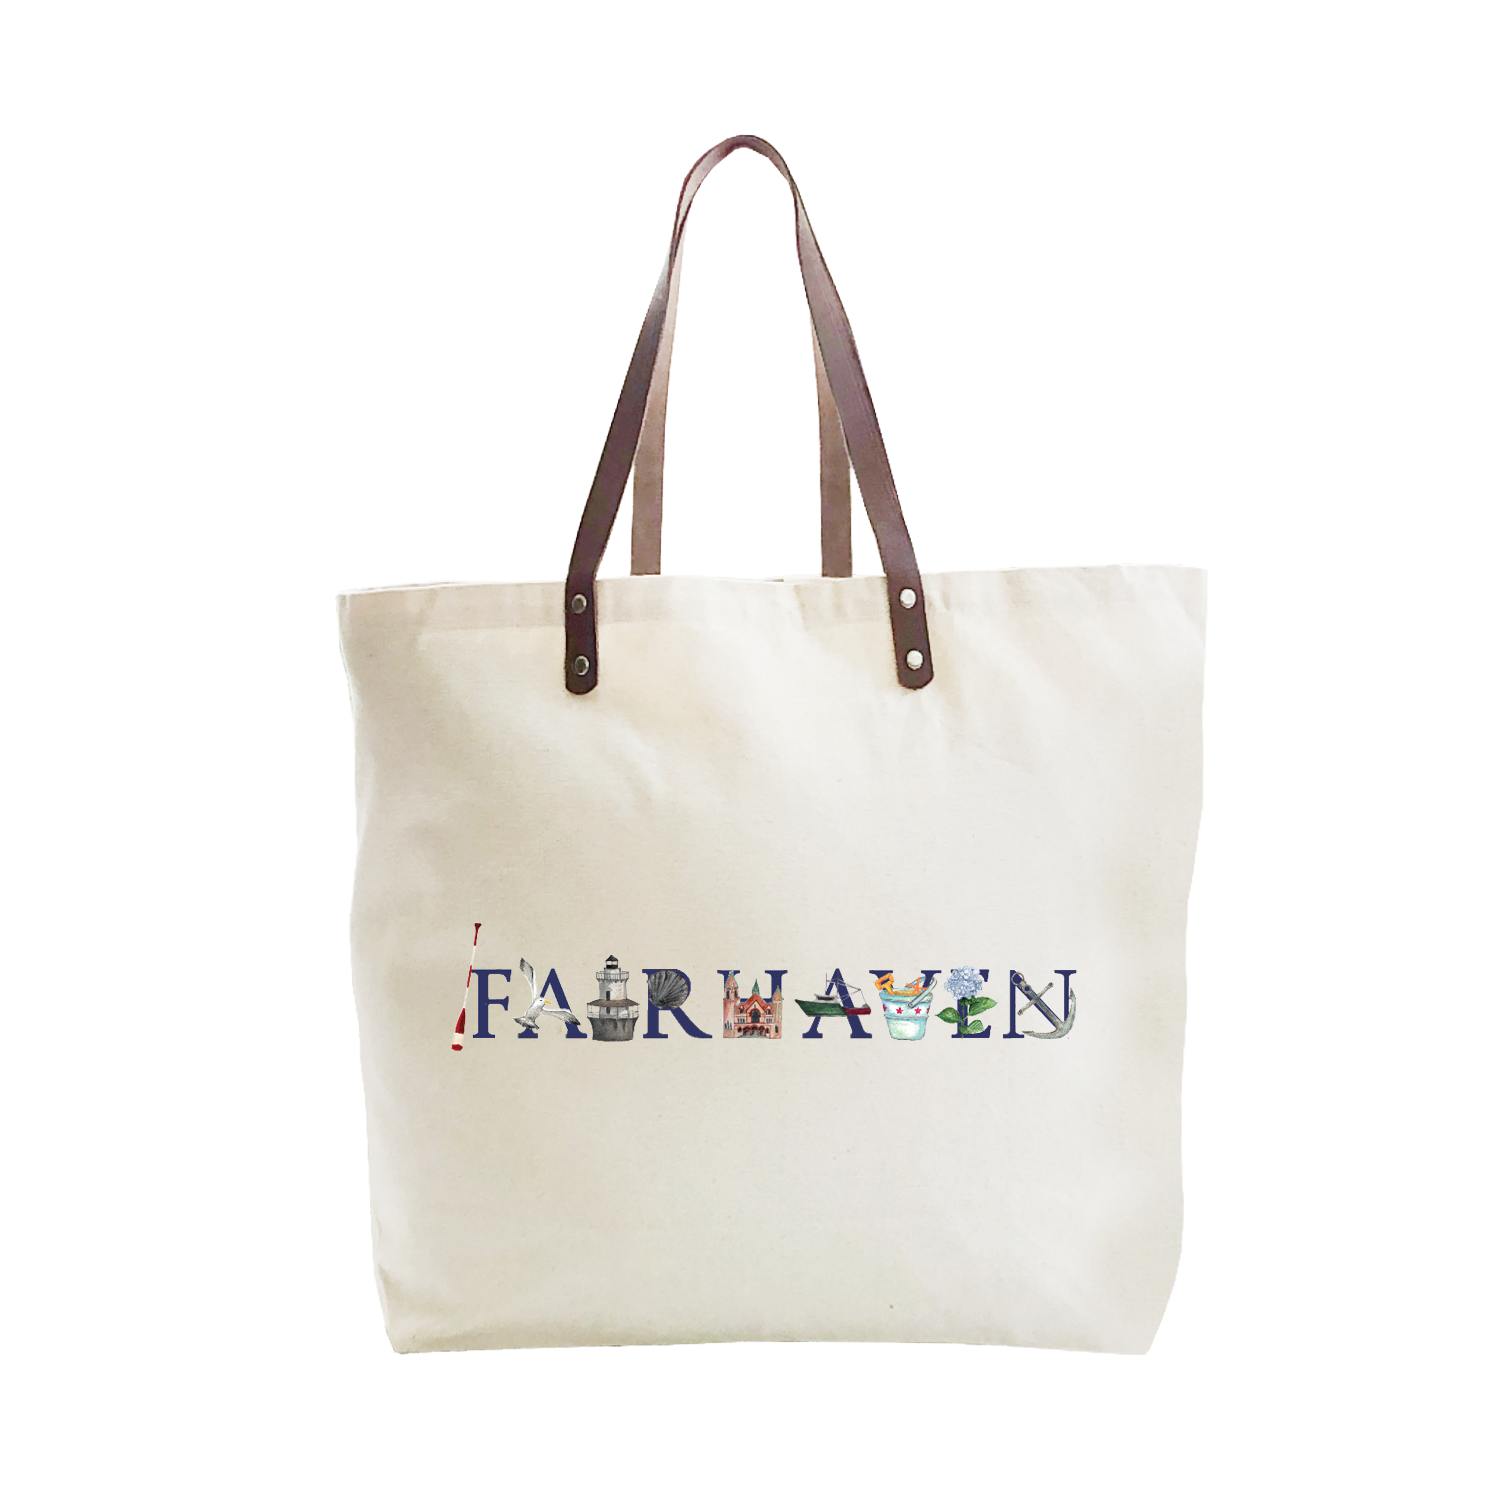 fairhaven large tote